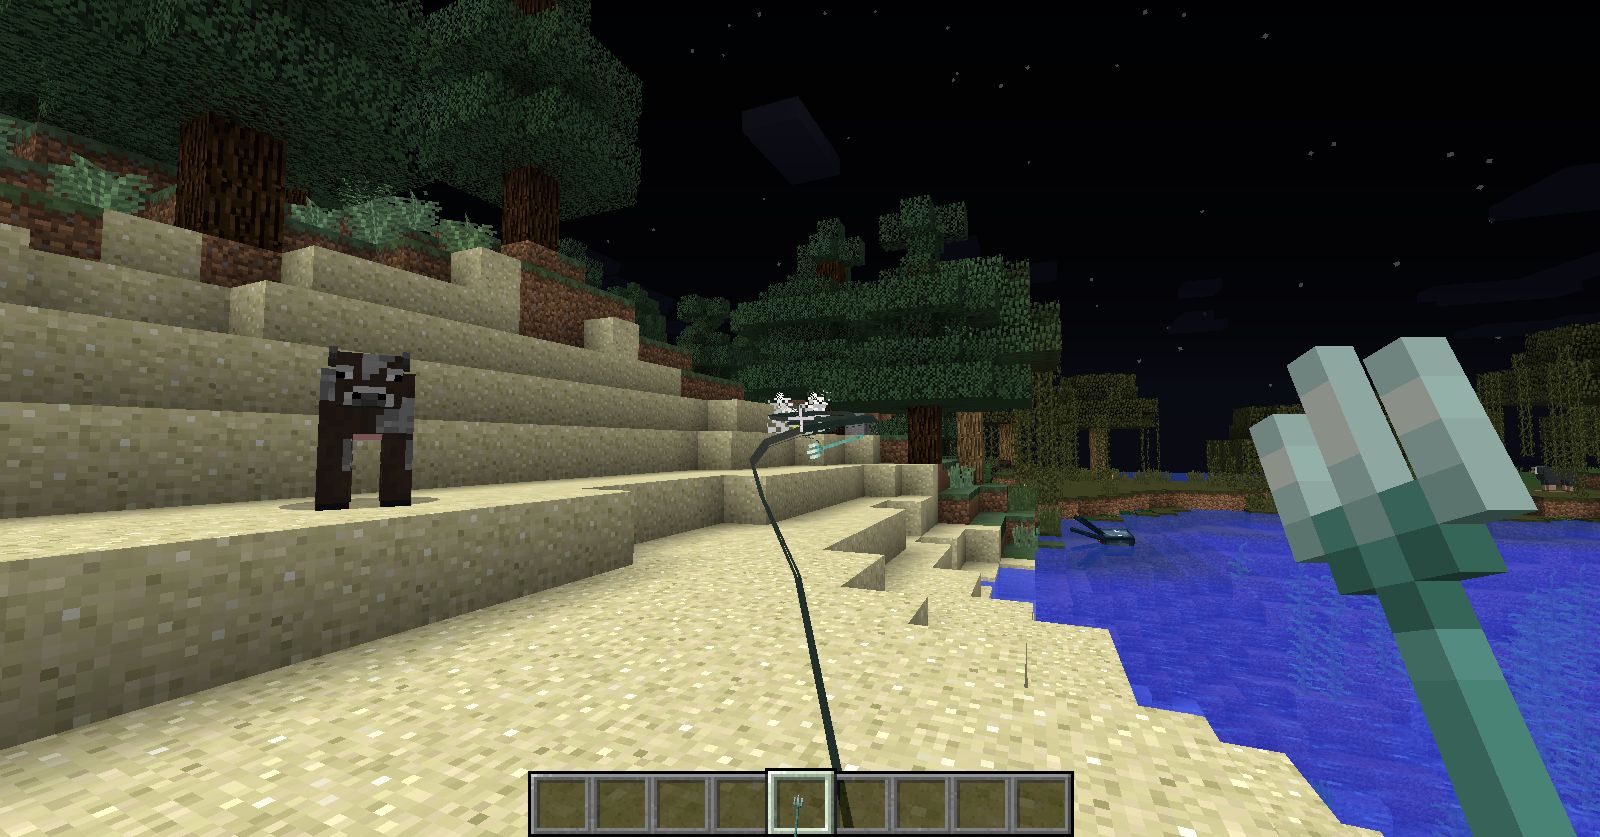 The trident is shown in the latest Minecraft snapshot